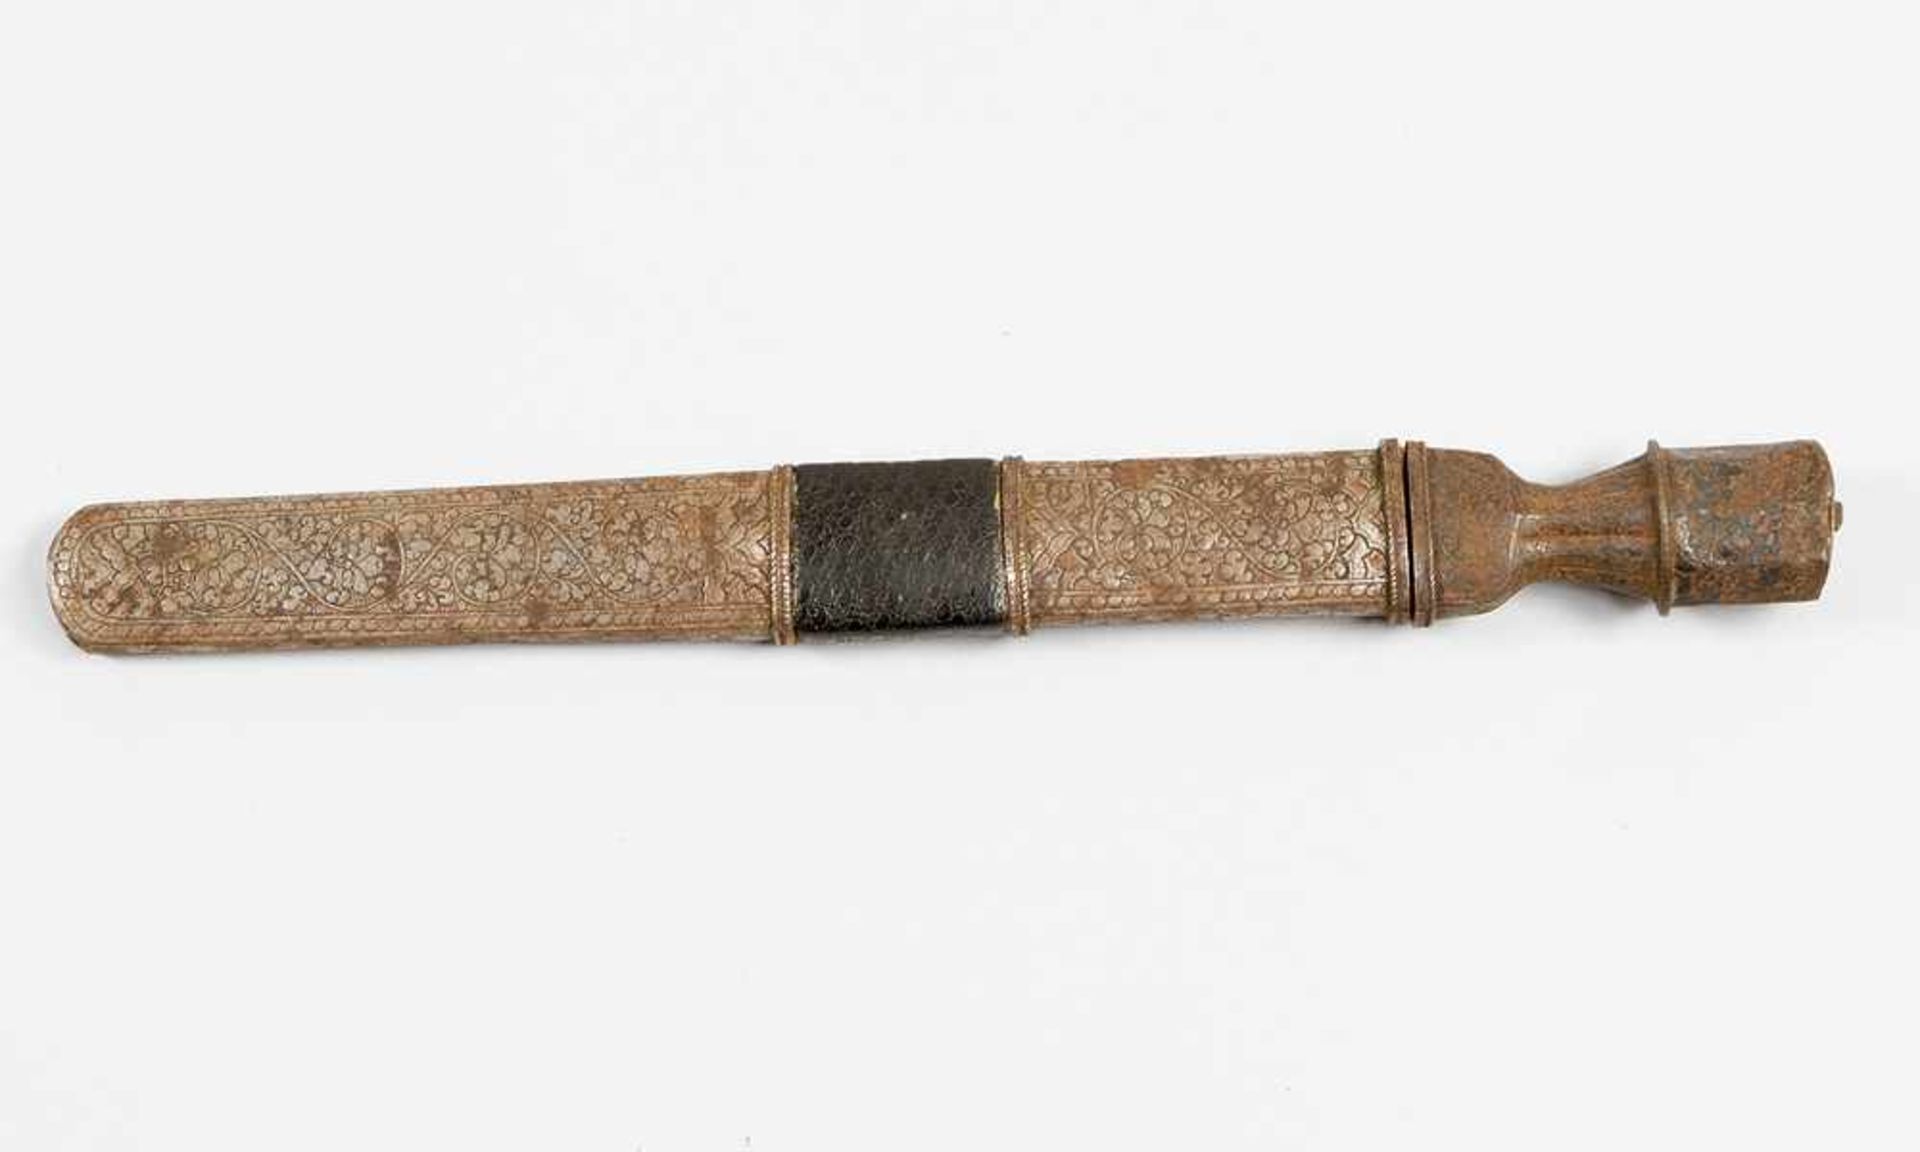 Oriental dagger with fluted and numbered blade; richly decorated metal shaft and handgrip; late 19th